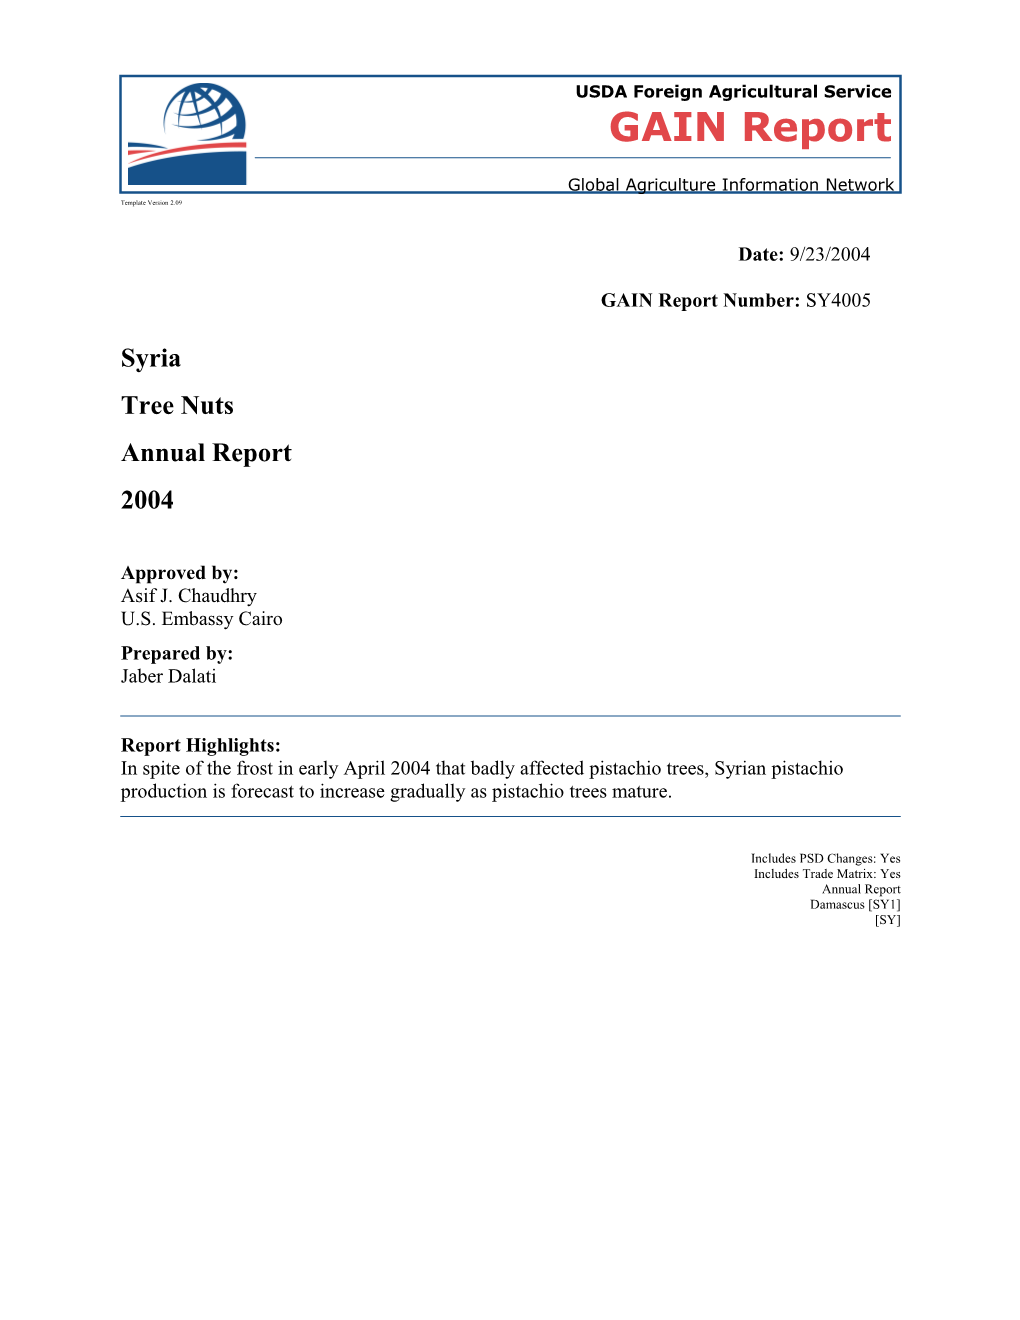 GAIN Report - SY4005 Page 2 of 6